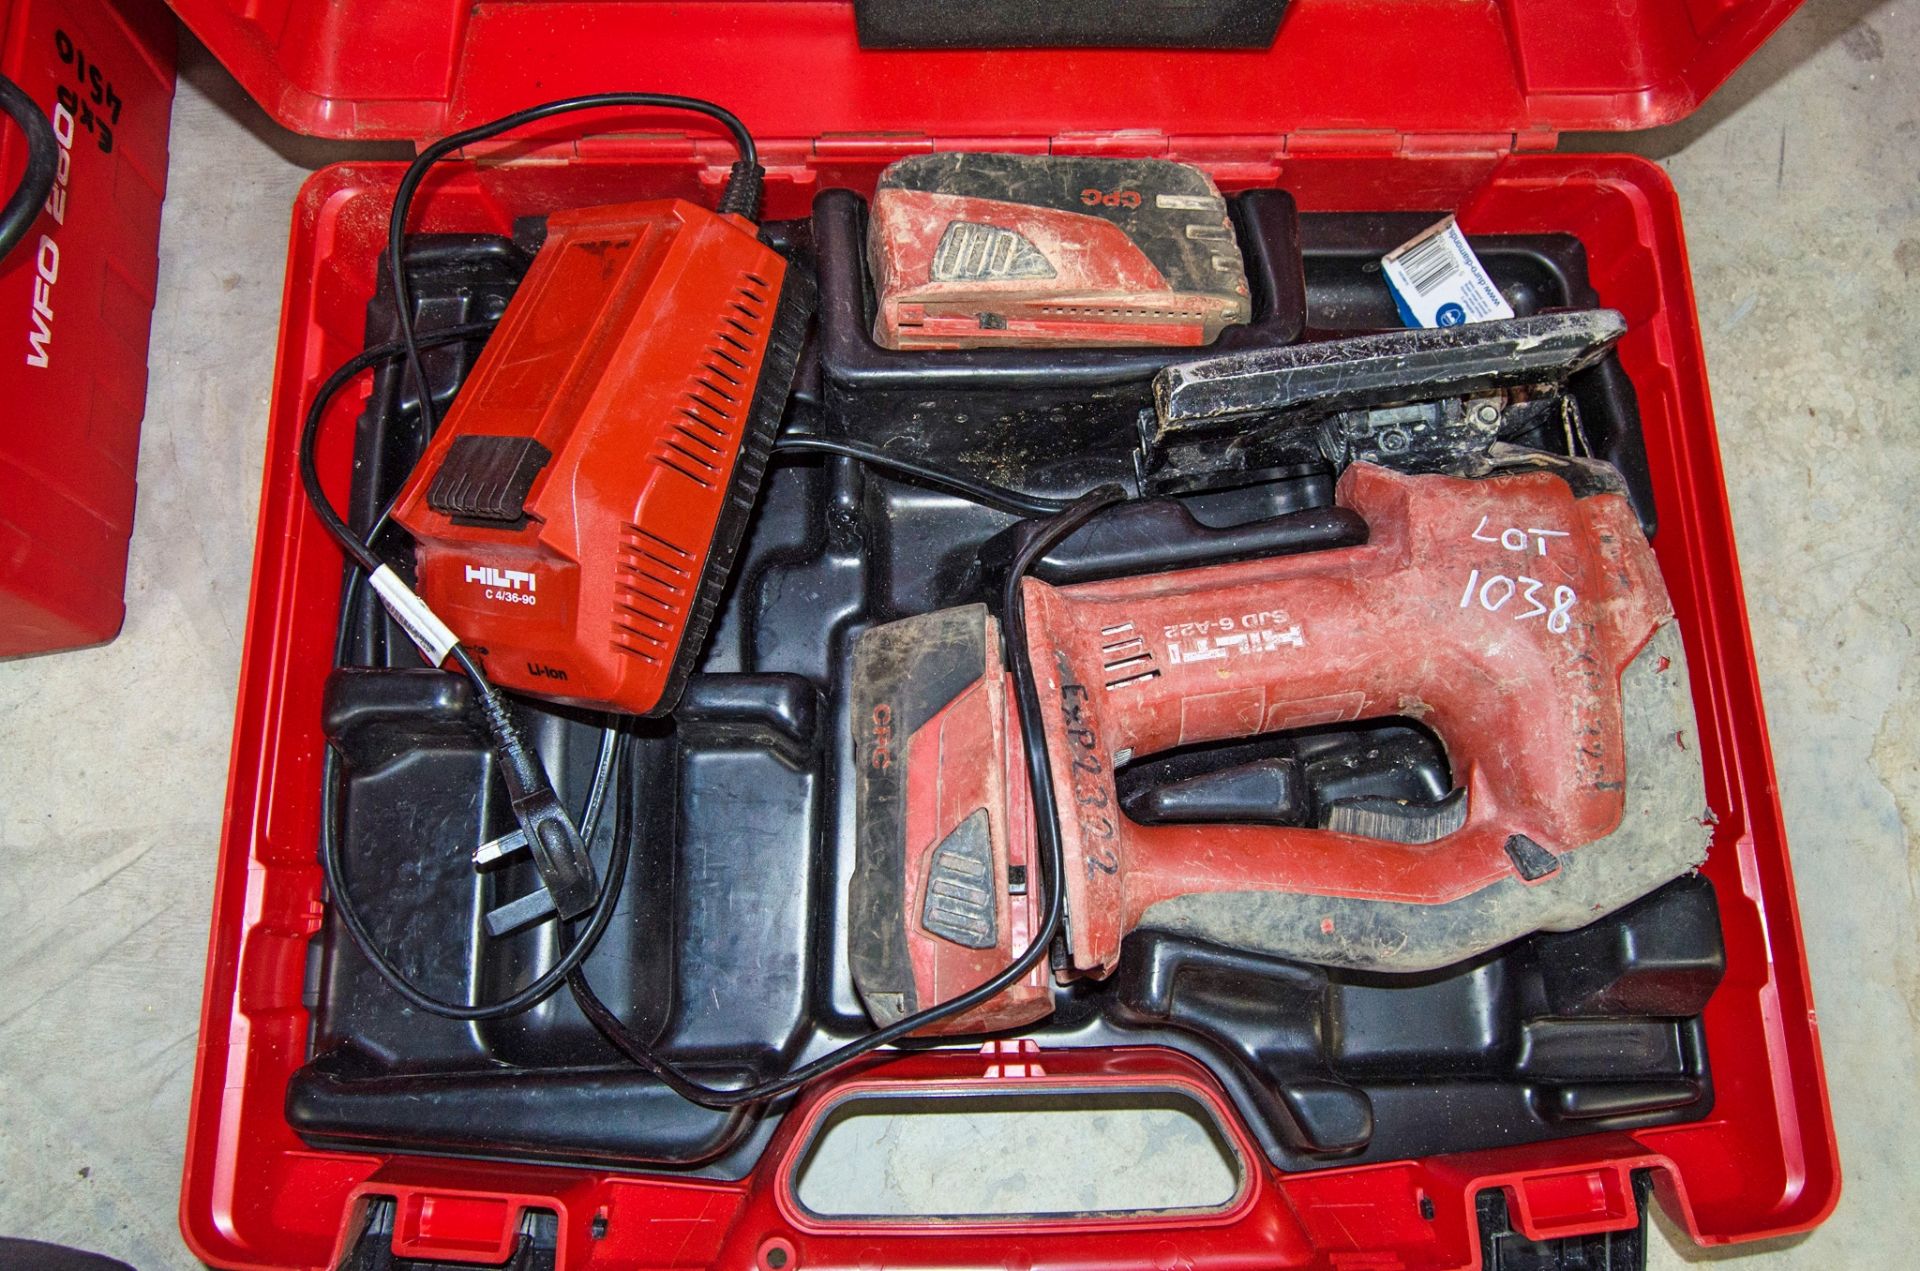 Hilti SJD 6-A22 22v cordless jigsaw c/w 2 batteries, charger and carry case EXP2322